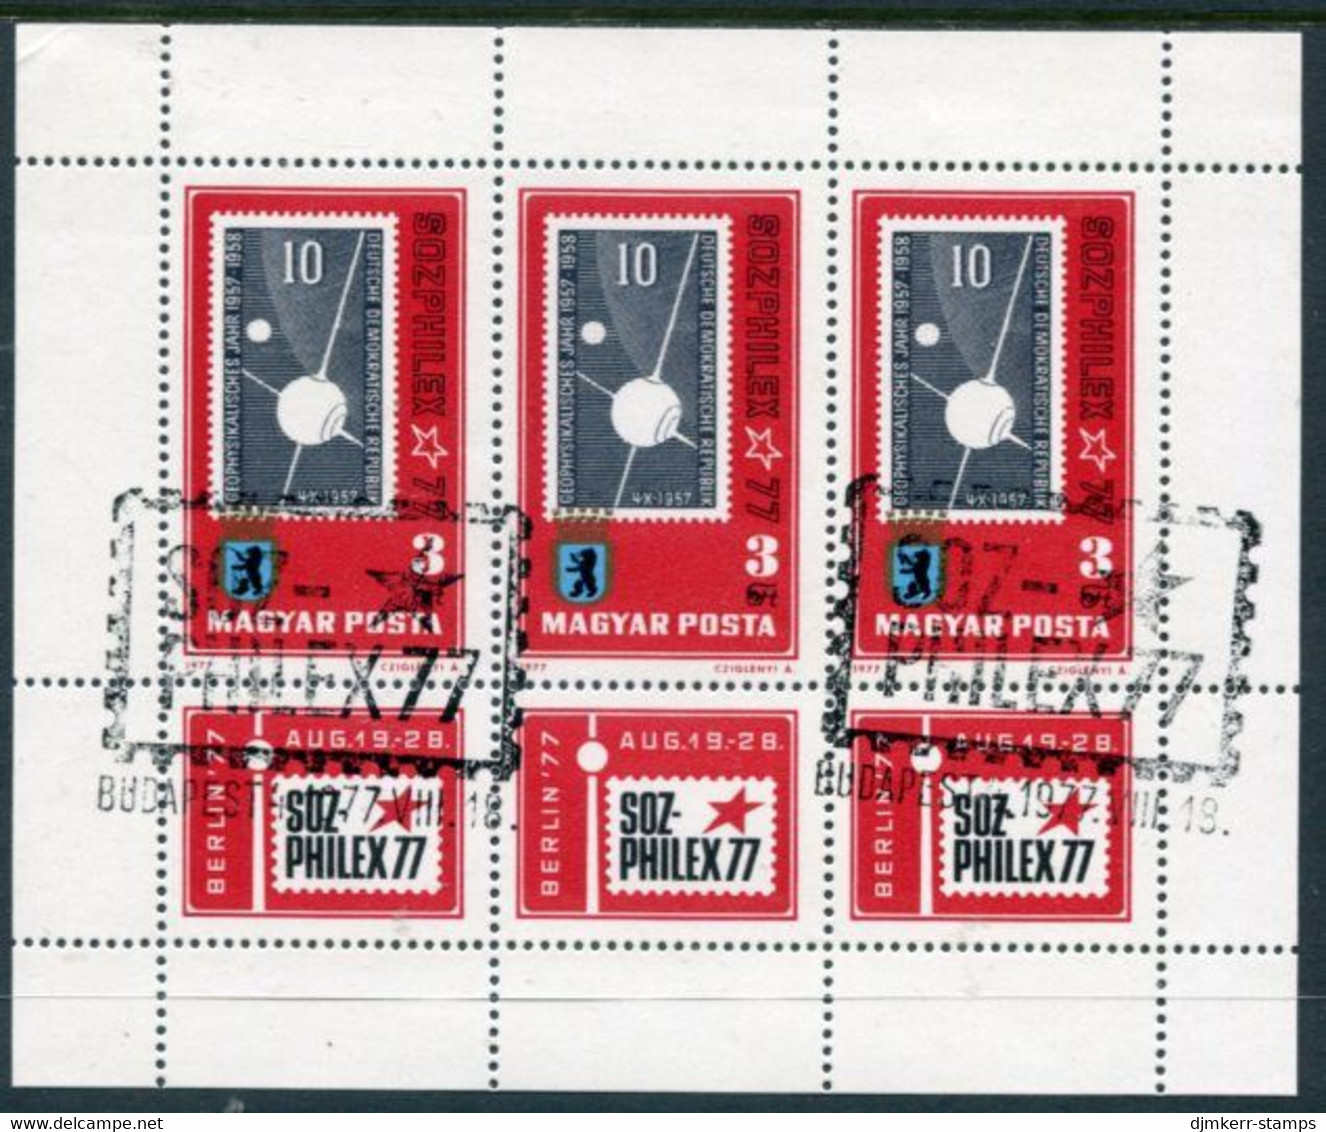 HUNGARY 1977 SOZPHILEX Stamp Exhibition Sheetlet Used.  Michel 3208 Kb - Blocs-feuillets